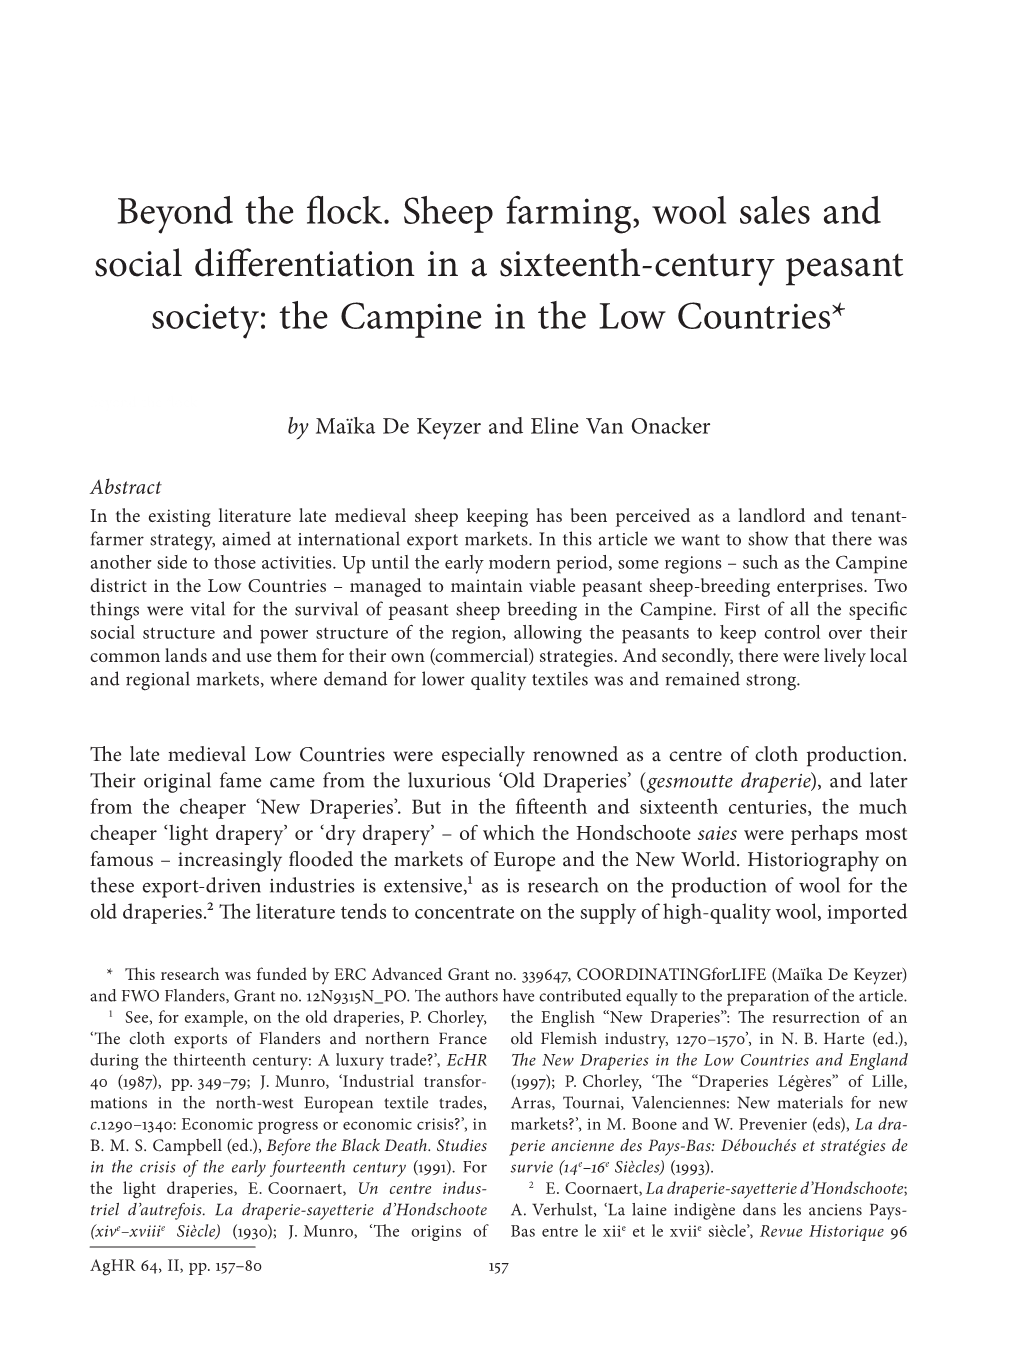 Beyond the Flock. Sheep Farming, Wool Sales and Social Differentiation in a Sixteenth-Century Peasant Society: the Campine in the Low Countries*